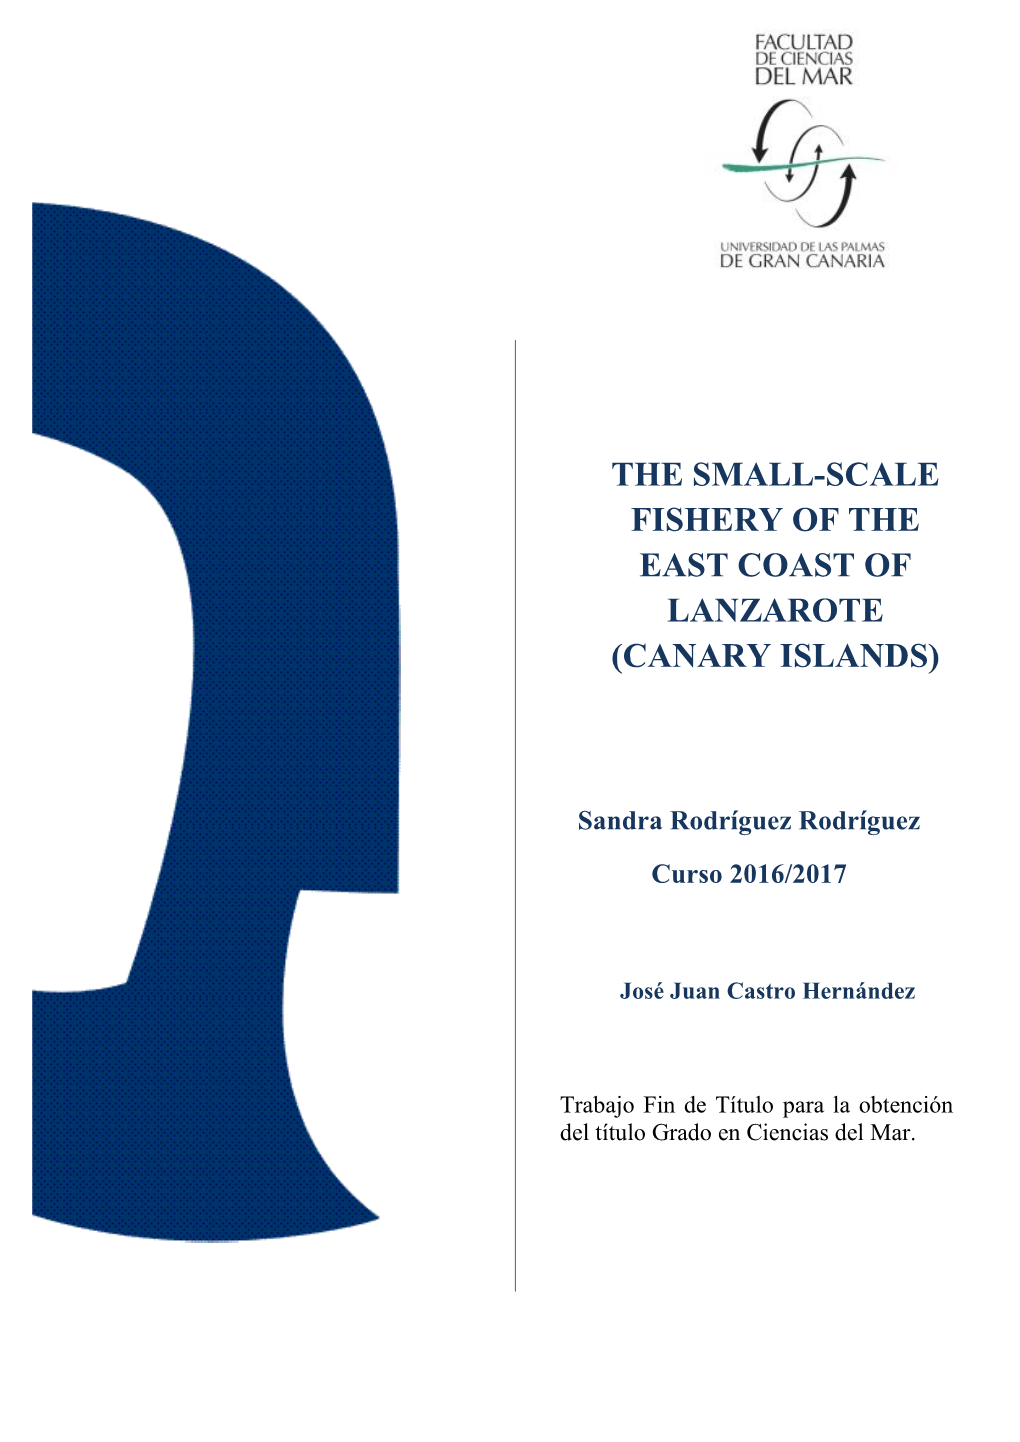 The Small-Scale Fishery of the East Coast of Lanzarote (Canary Islands) Sandra Rodríguez Rodríguez